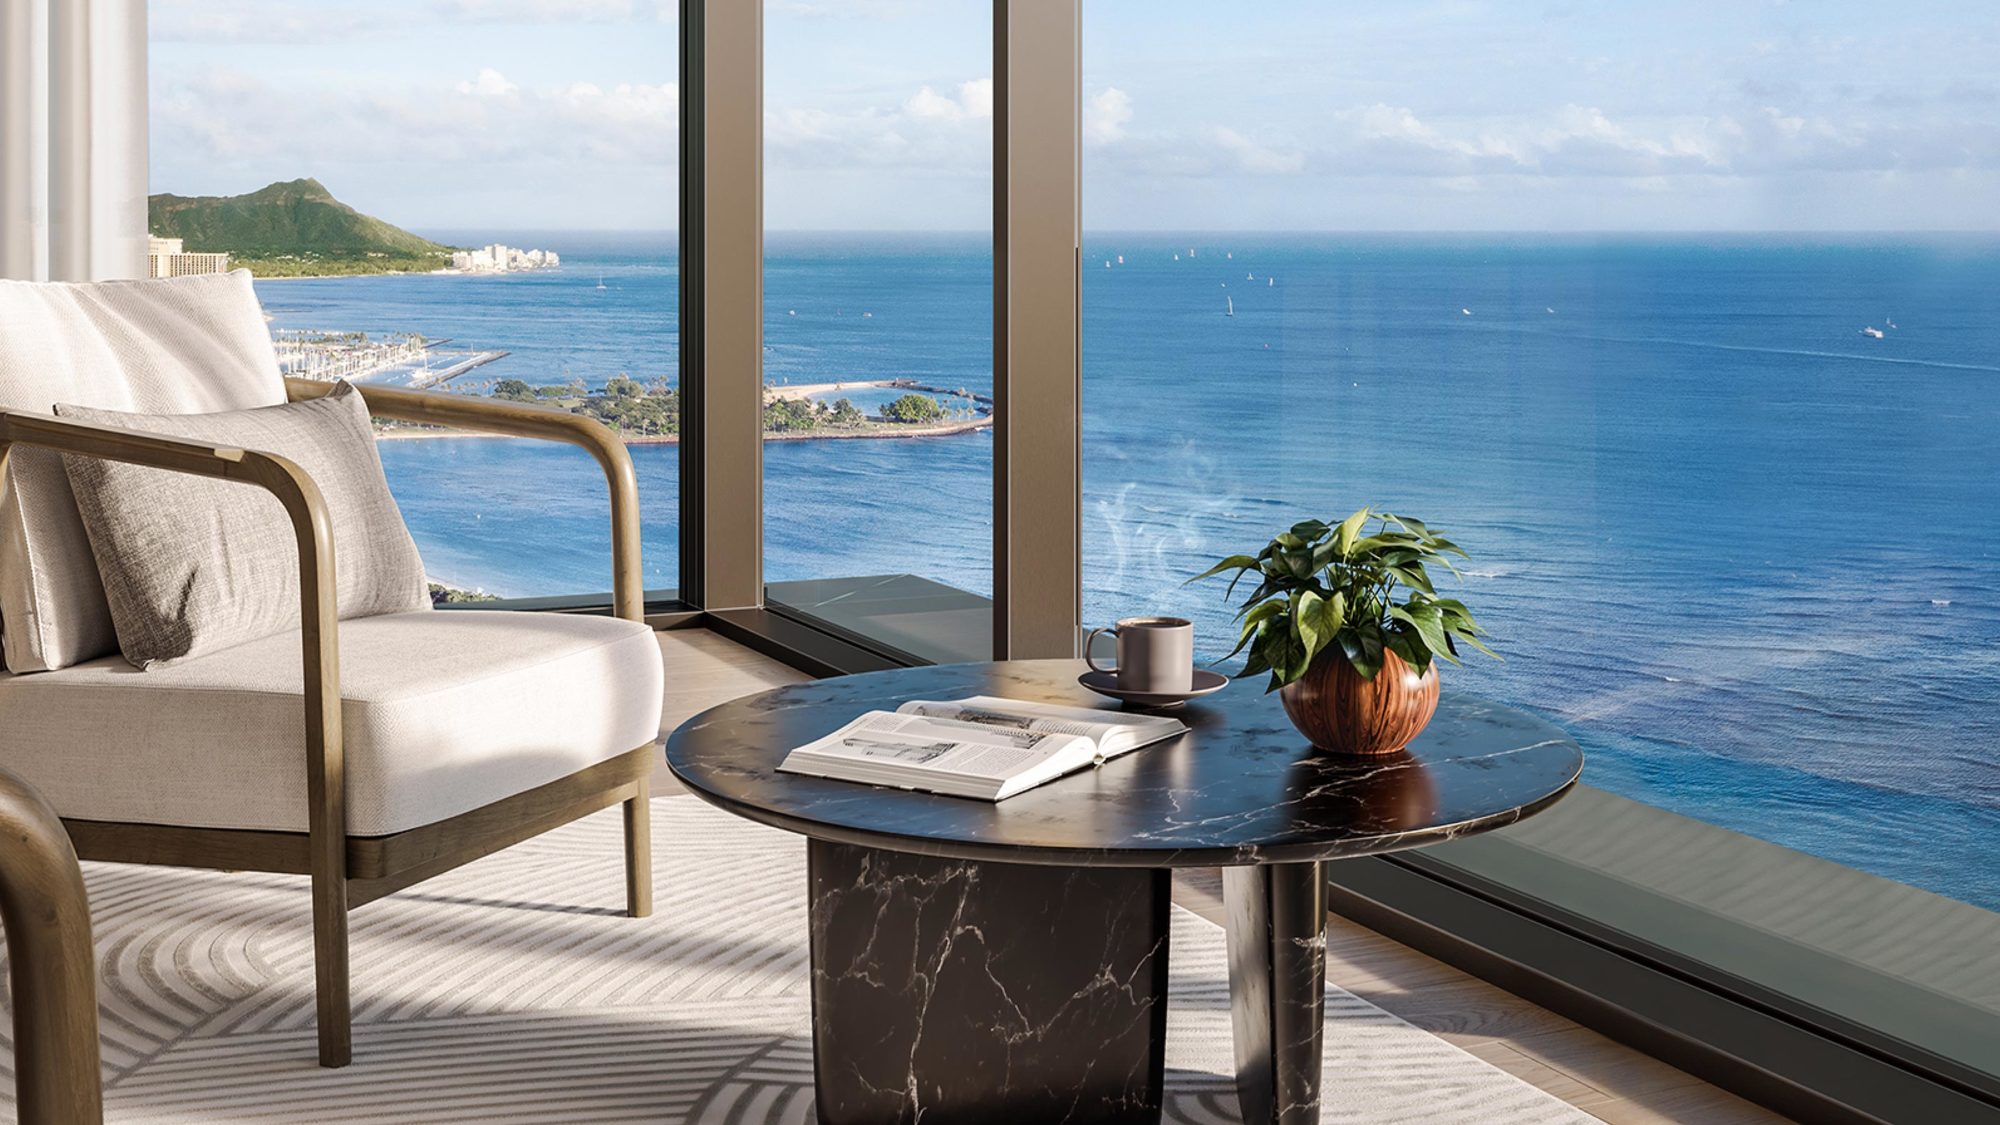 The corner area of a Victoria Place living room showing floor-to-ceiling windows overlooking the Pacific Ocean and Diamond Head.